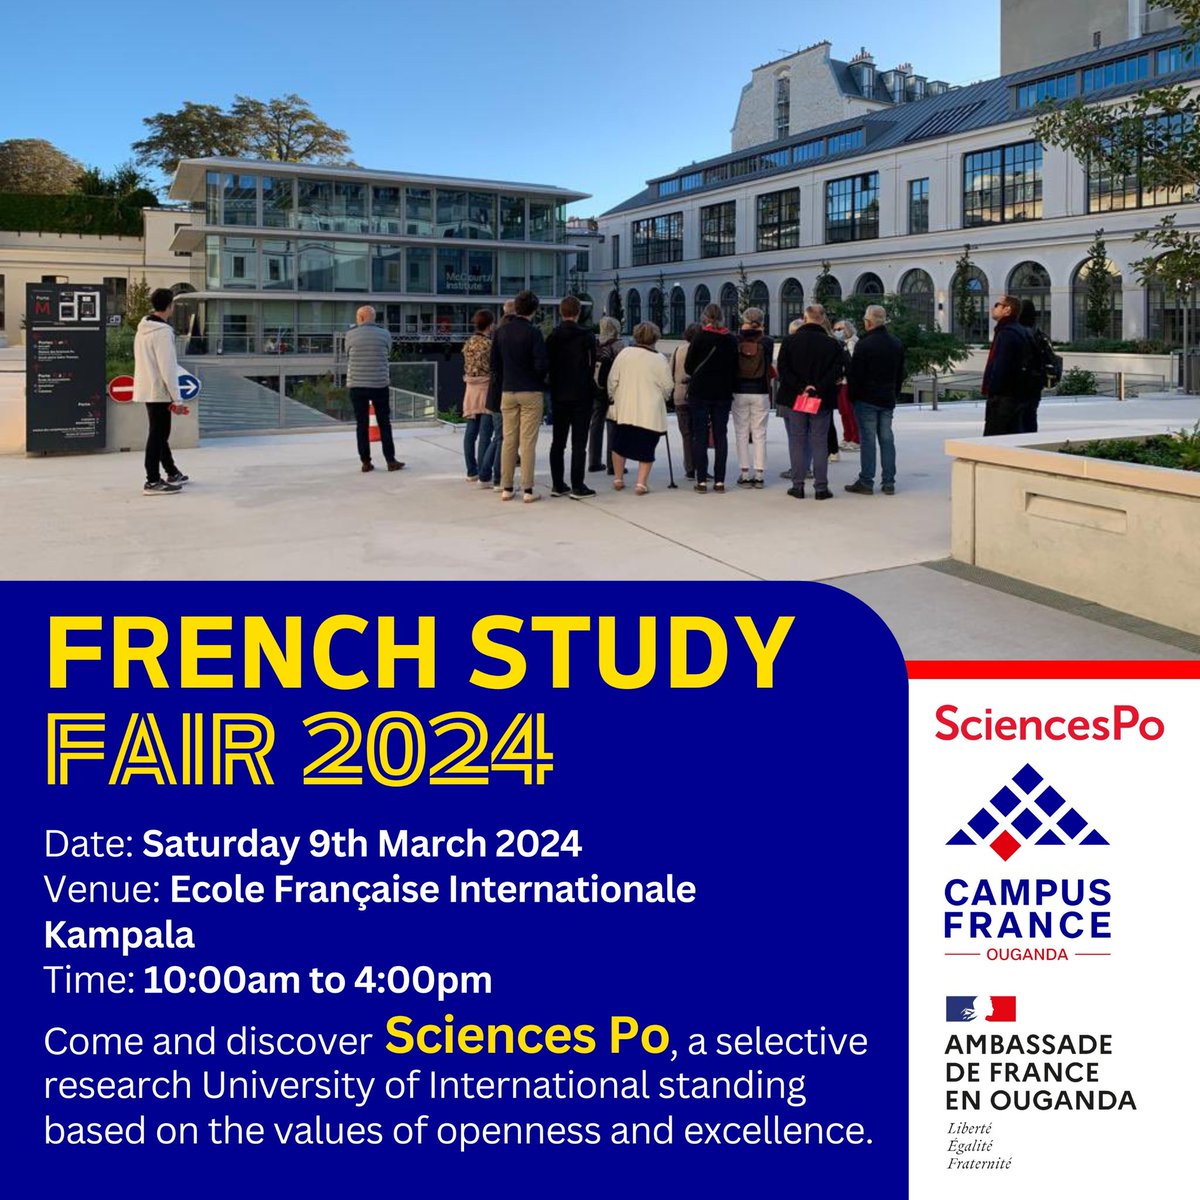 Are you interested in #PoliticalSciences ? The prestigious @sciencespo is on ground ! Pass by @lfkampala up to 4:00pm and get to speak to a represententive. Your dream to study in France is closer than you think ! #RendezvousenFrance 🇫🇷